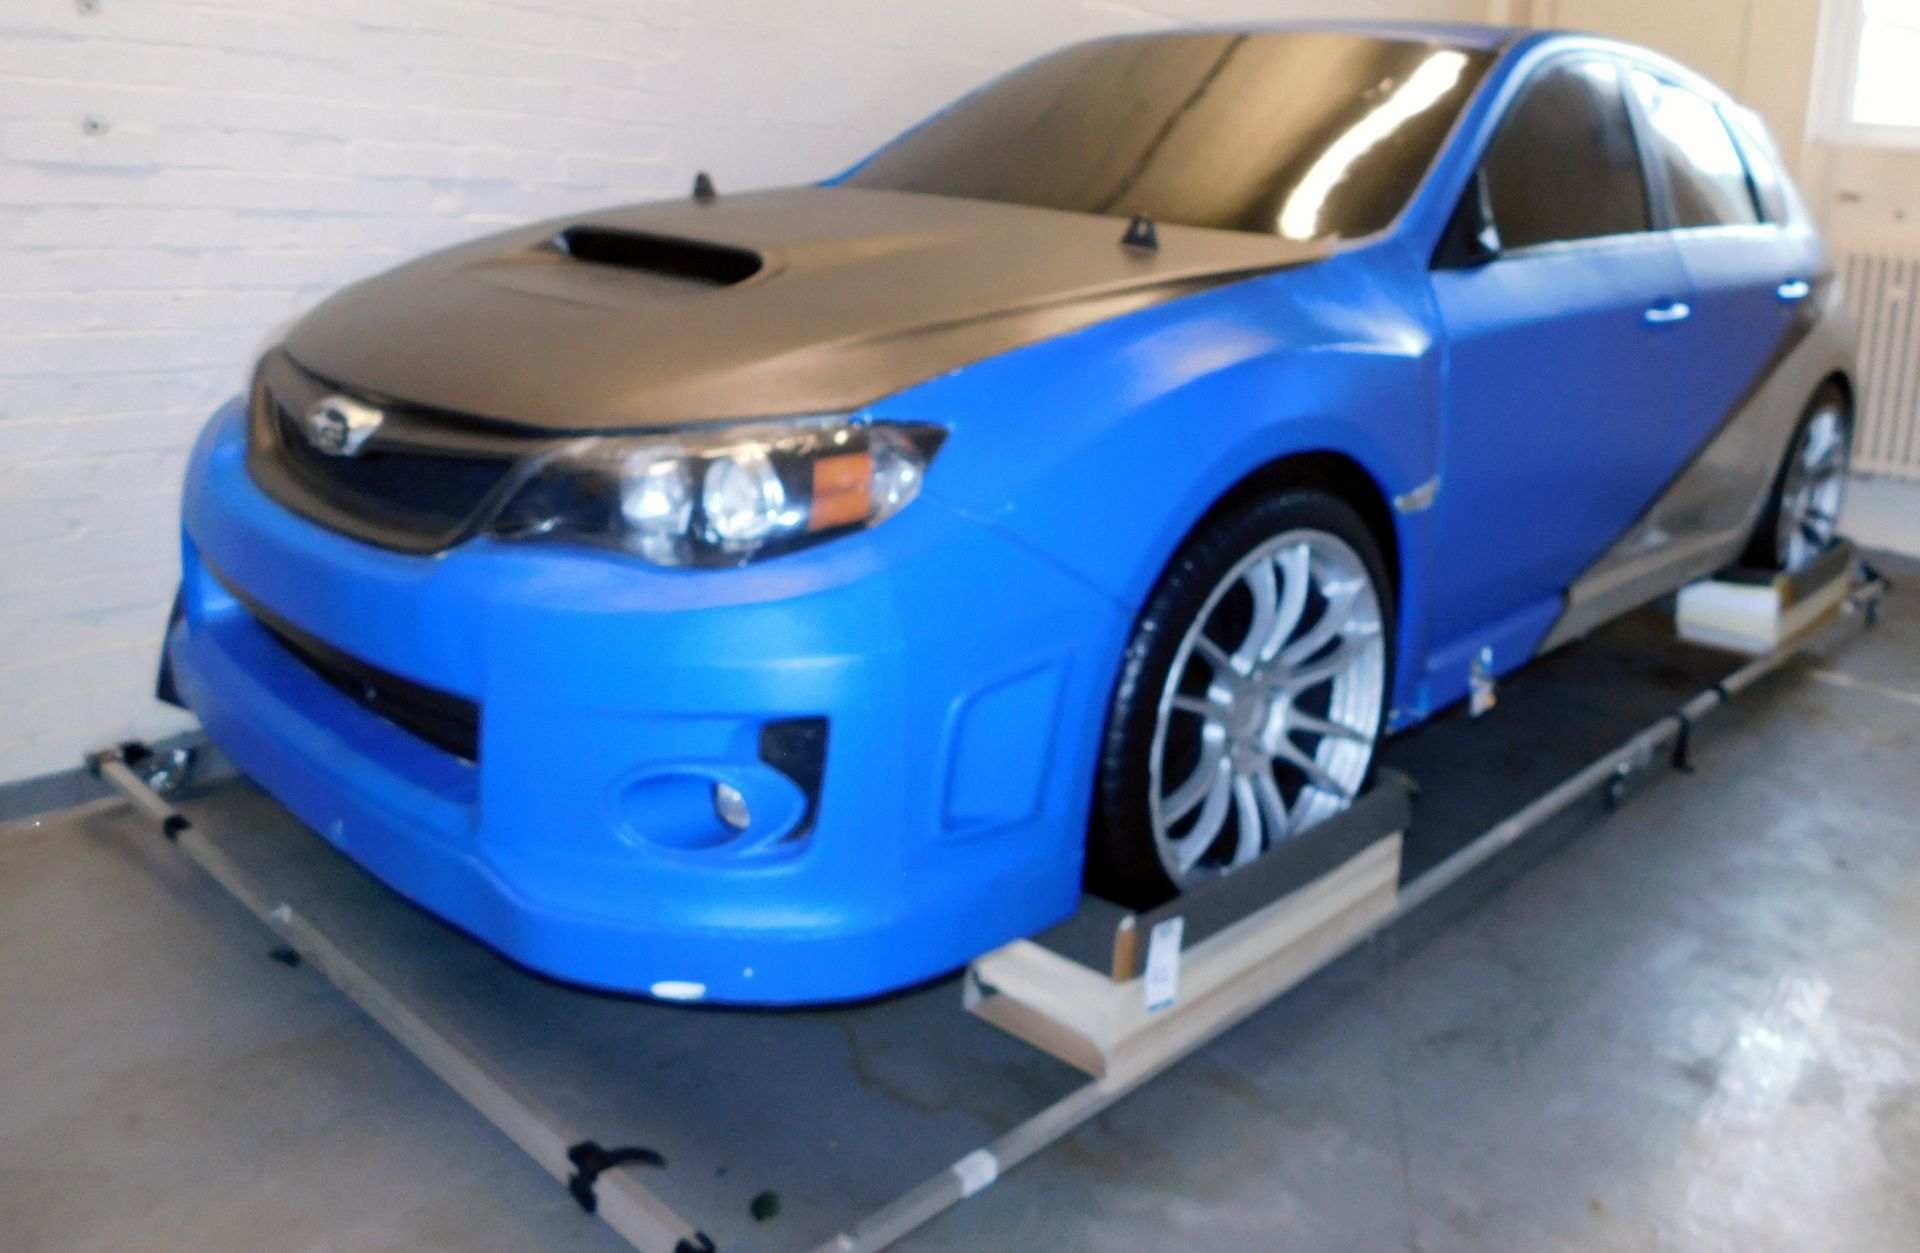 “Gear Factor” Helium Filled Flying Full Size Subaru Imprezza Model With 4 Electric Remote Controlled - Image 2 of 9